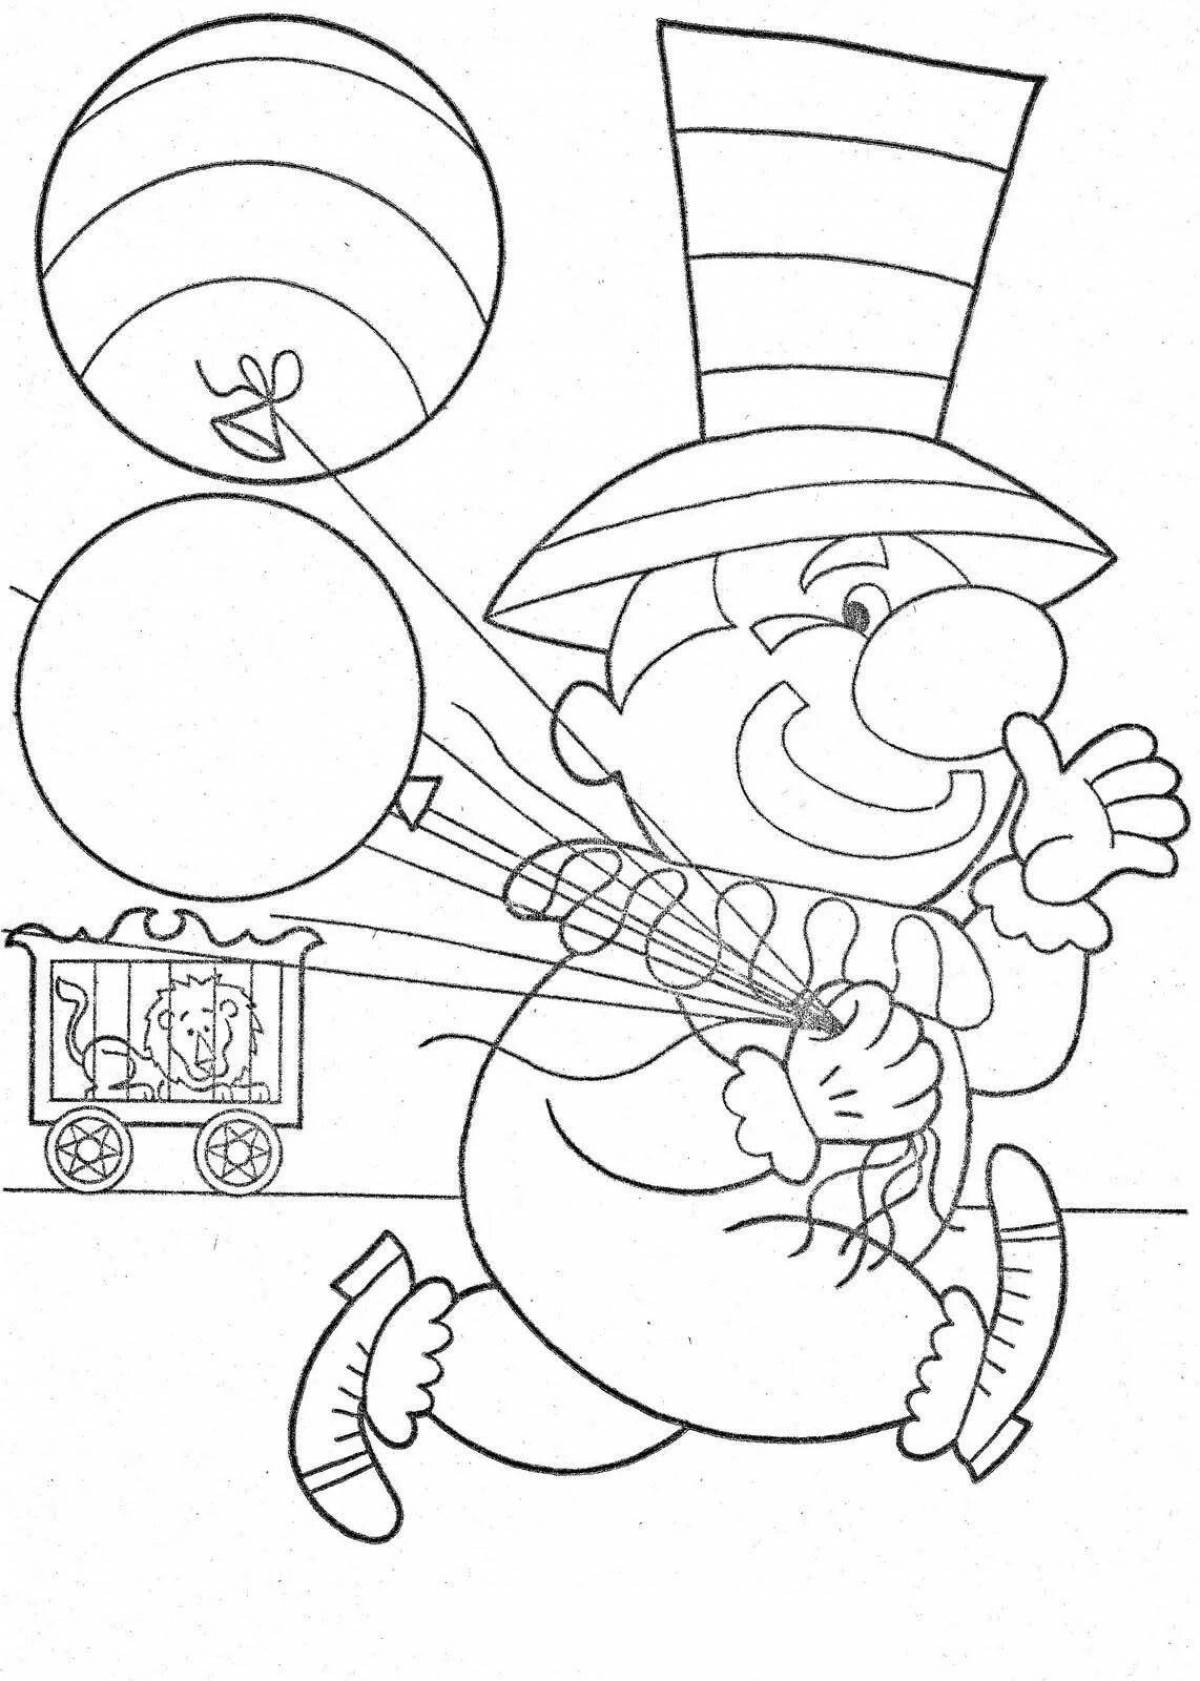 Playful red ball coloring page